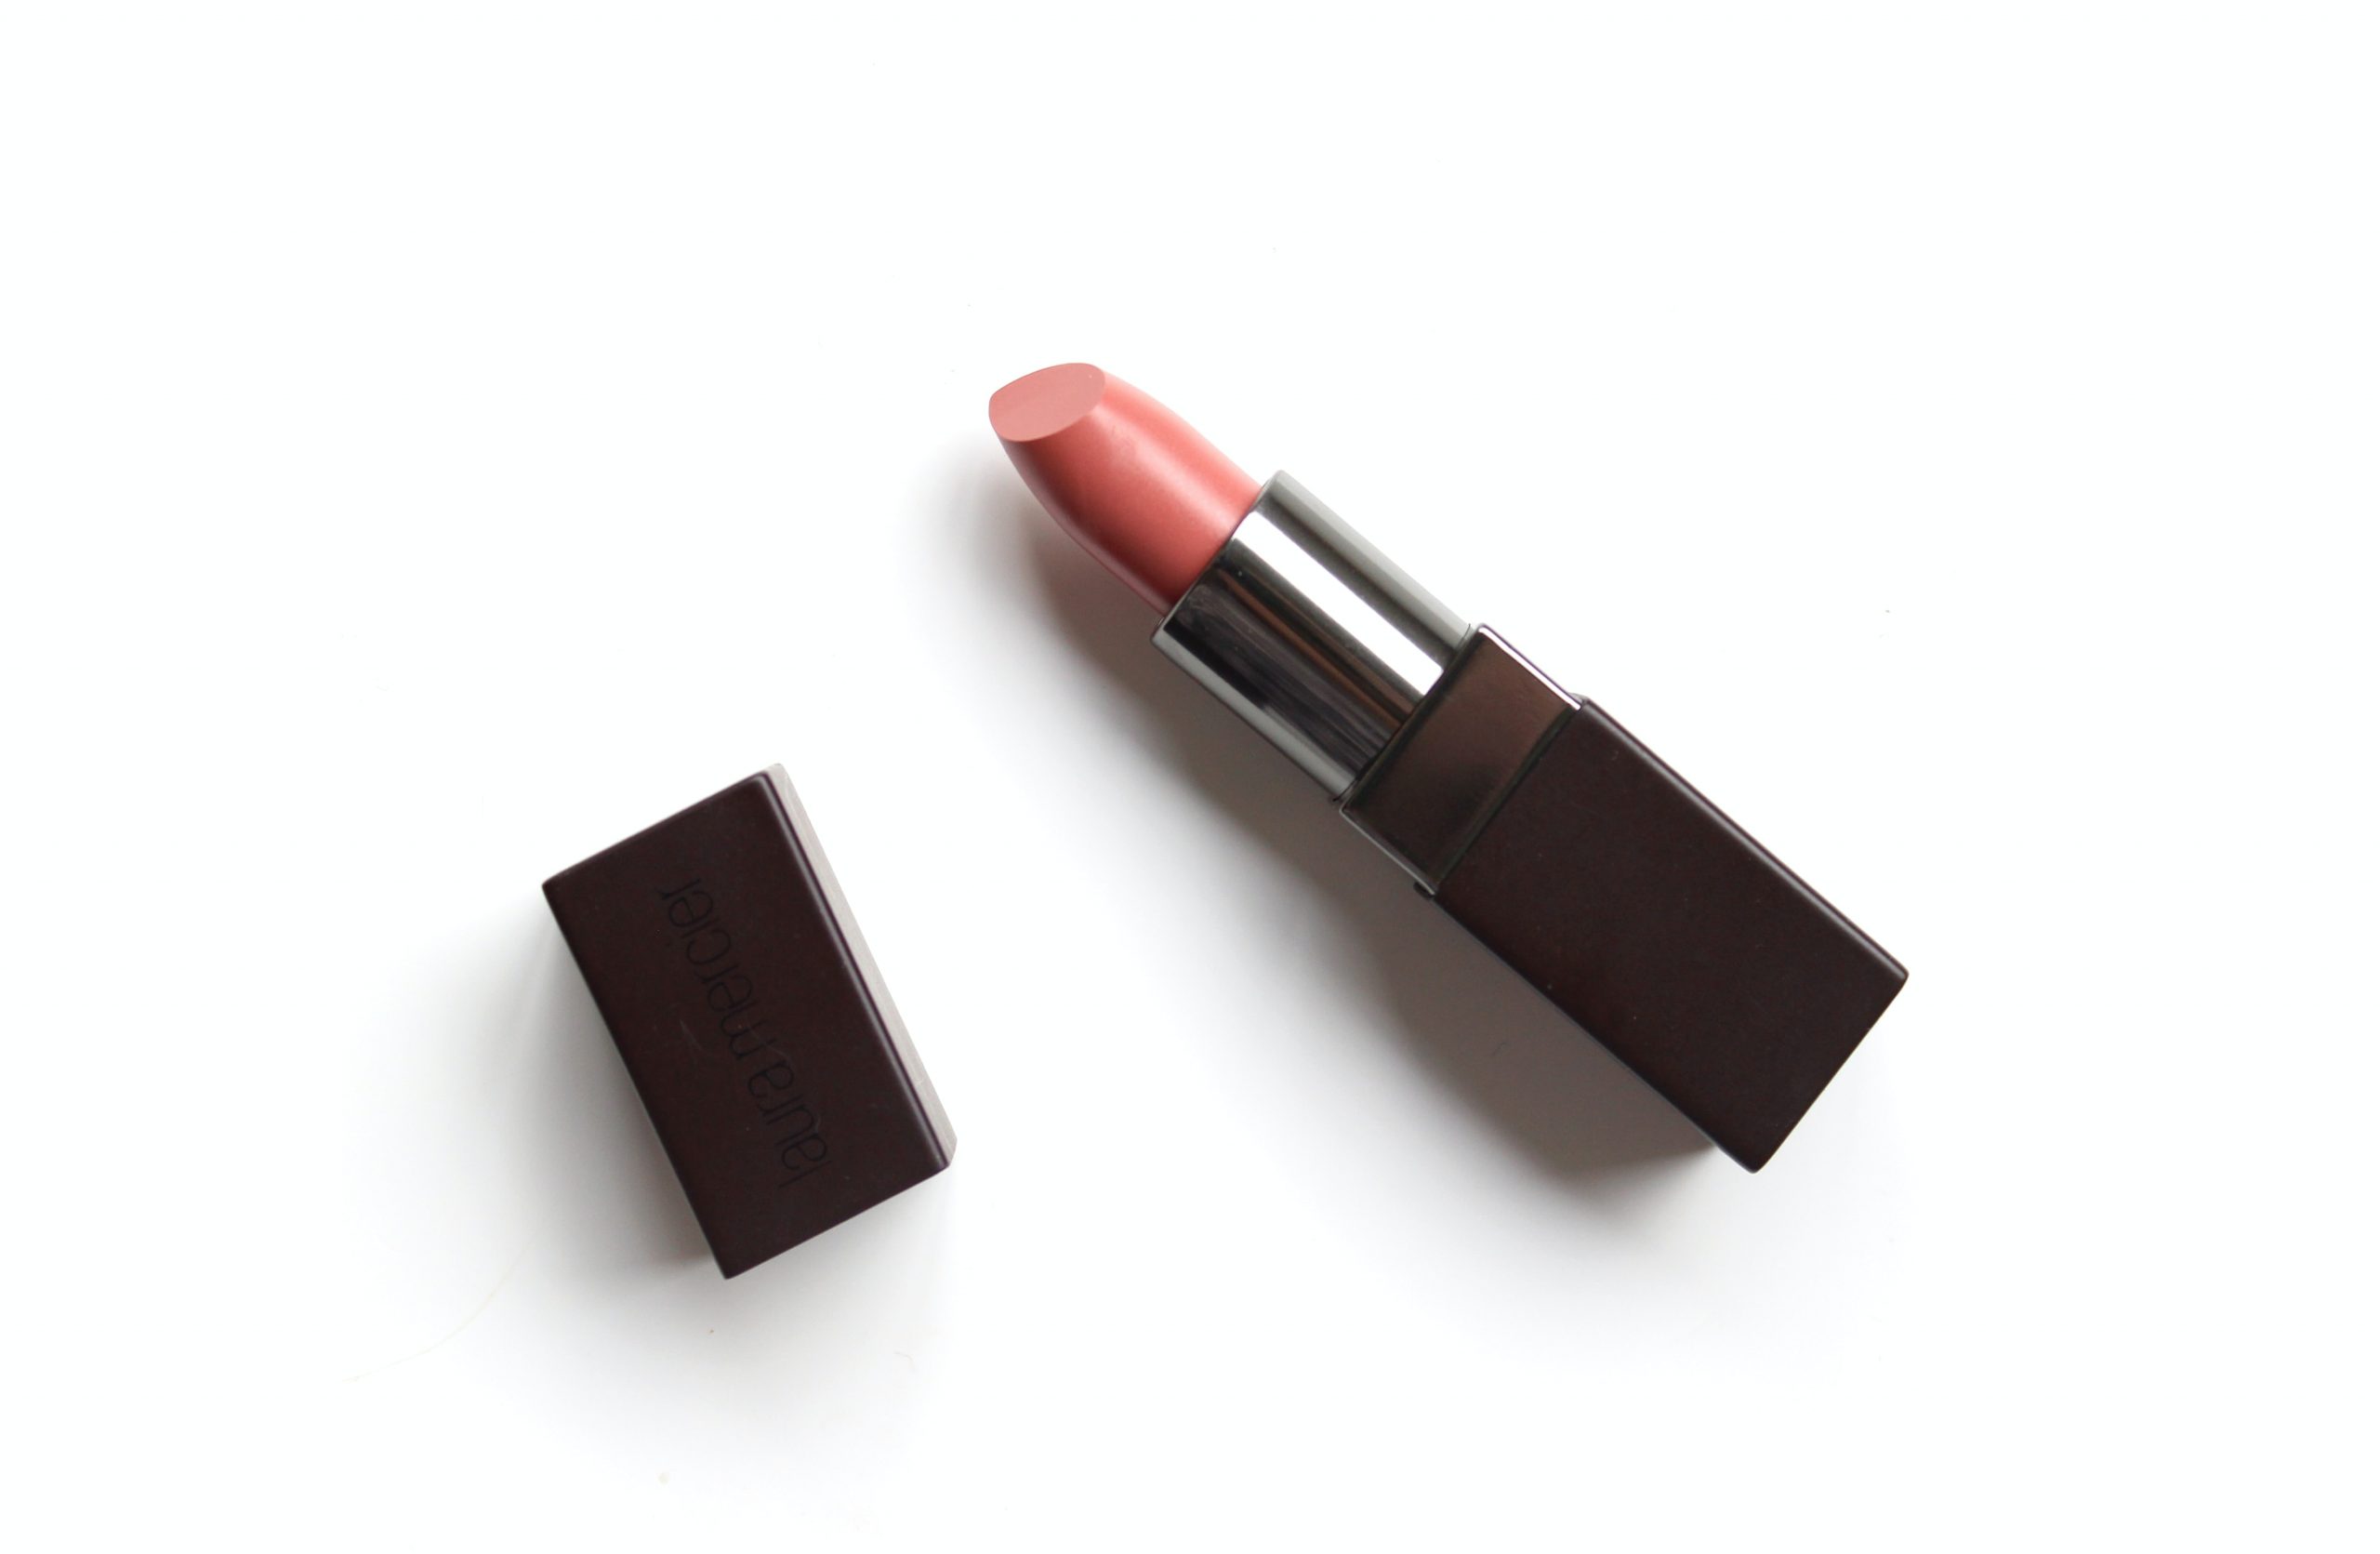 National Lipstick Day Discounts, Free Gifts, and Cash Back